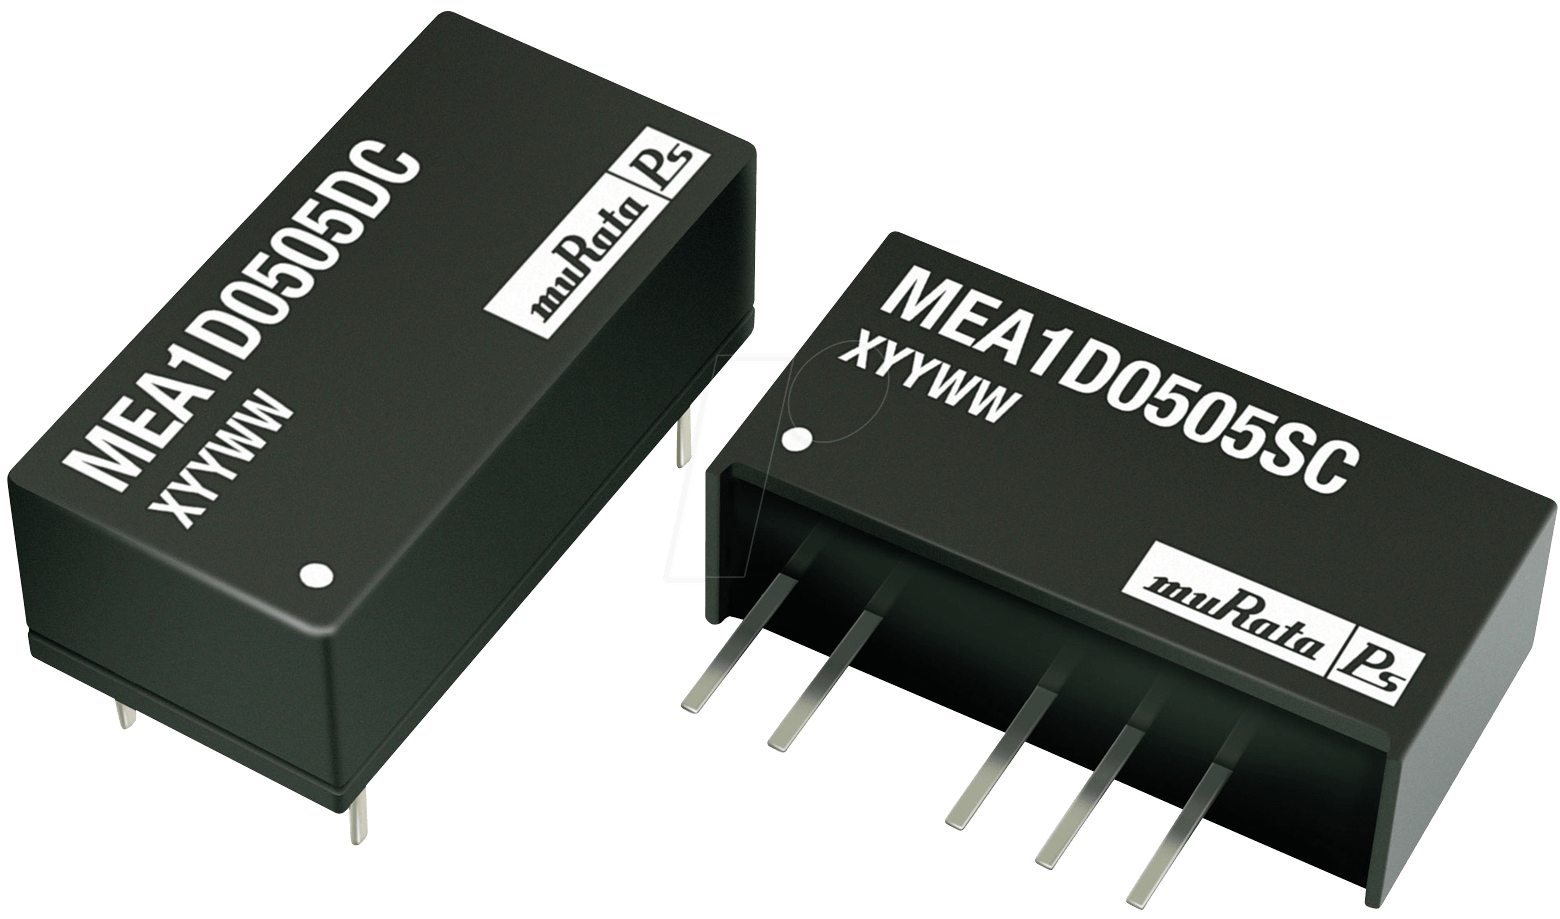 MEA1D1509SC - DC/DC-Wandler MEA, 1 W, 9 V, 56 mA, SIL, Dual von MURATA POWER SOLUTIONS